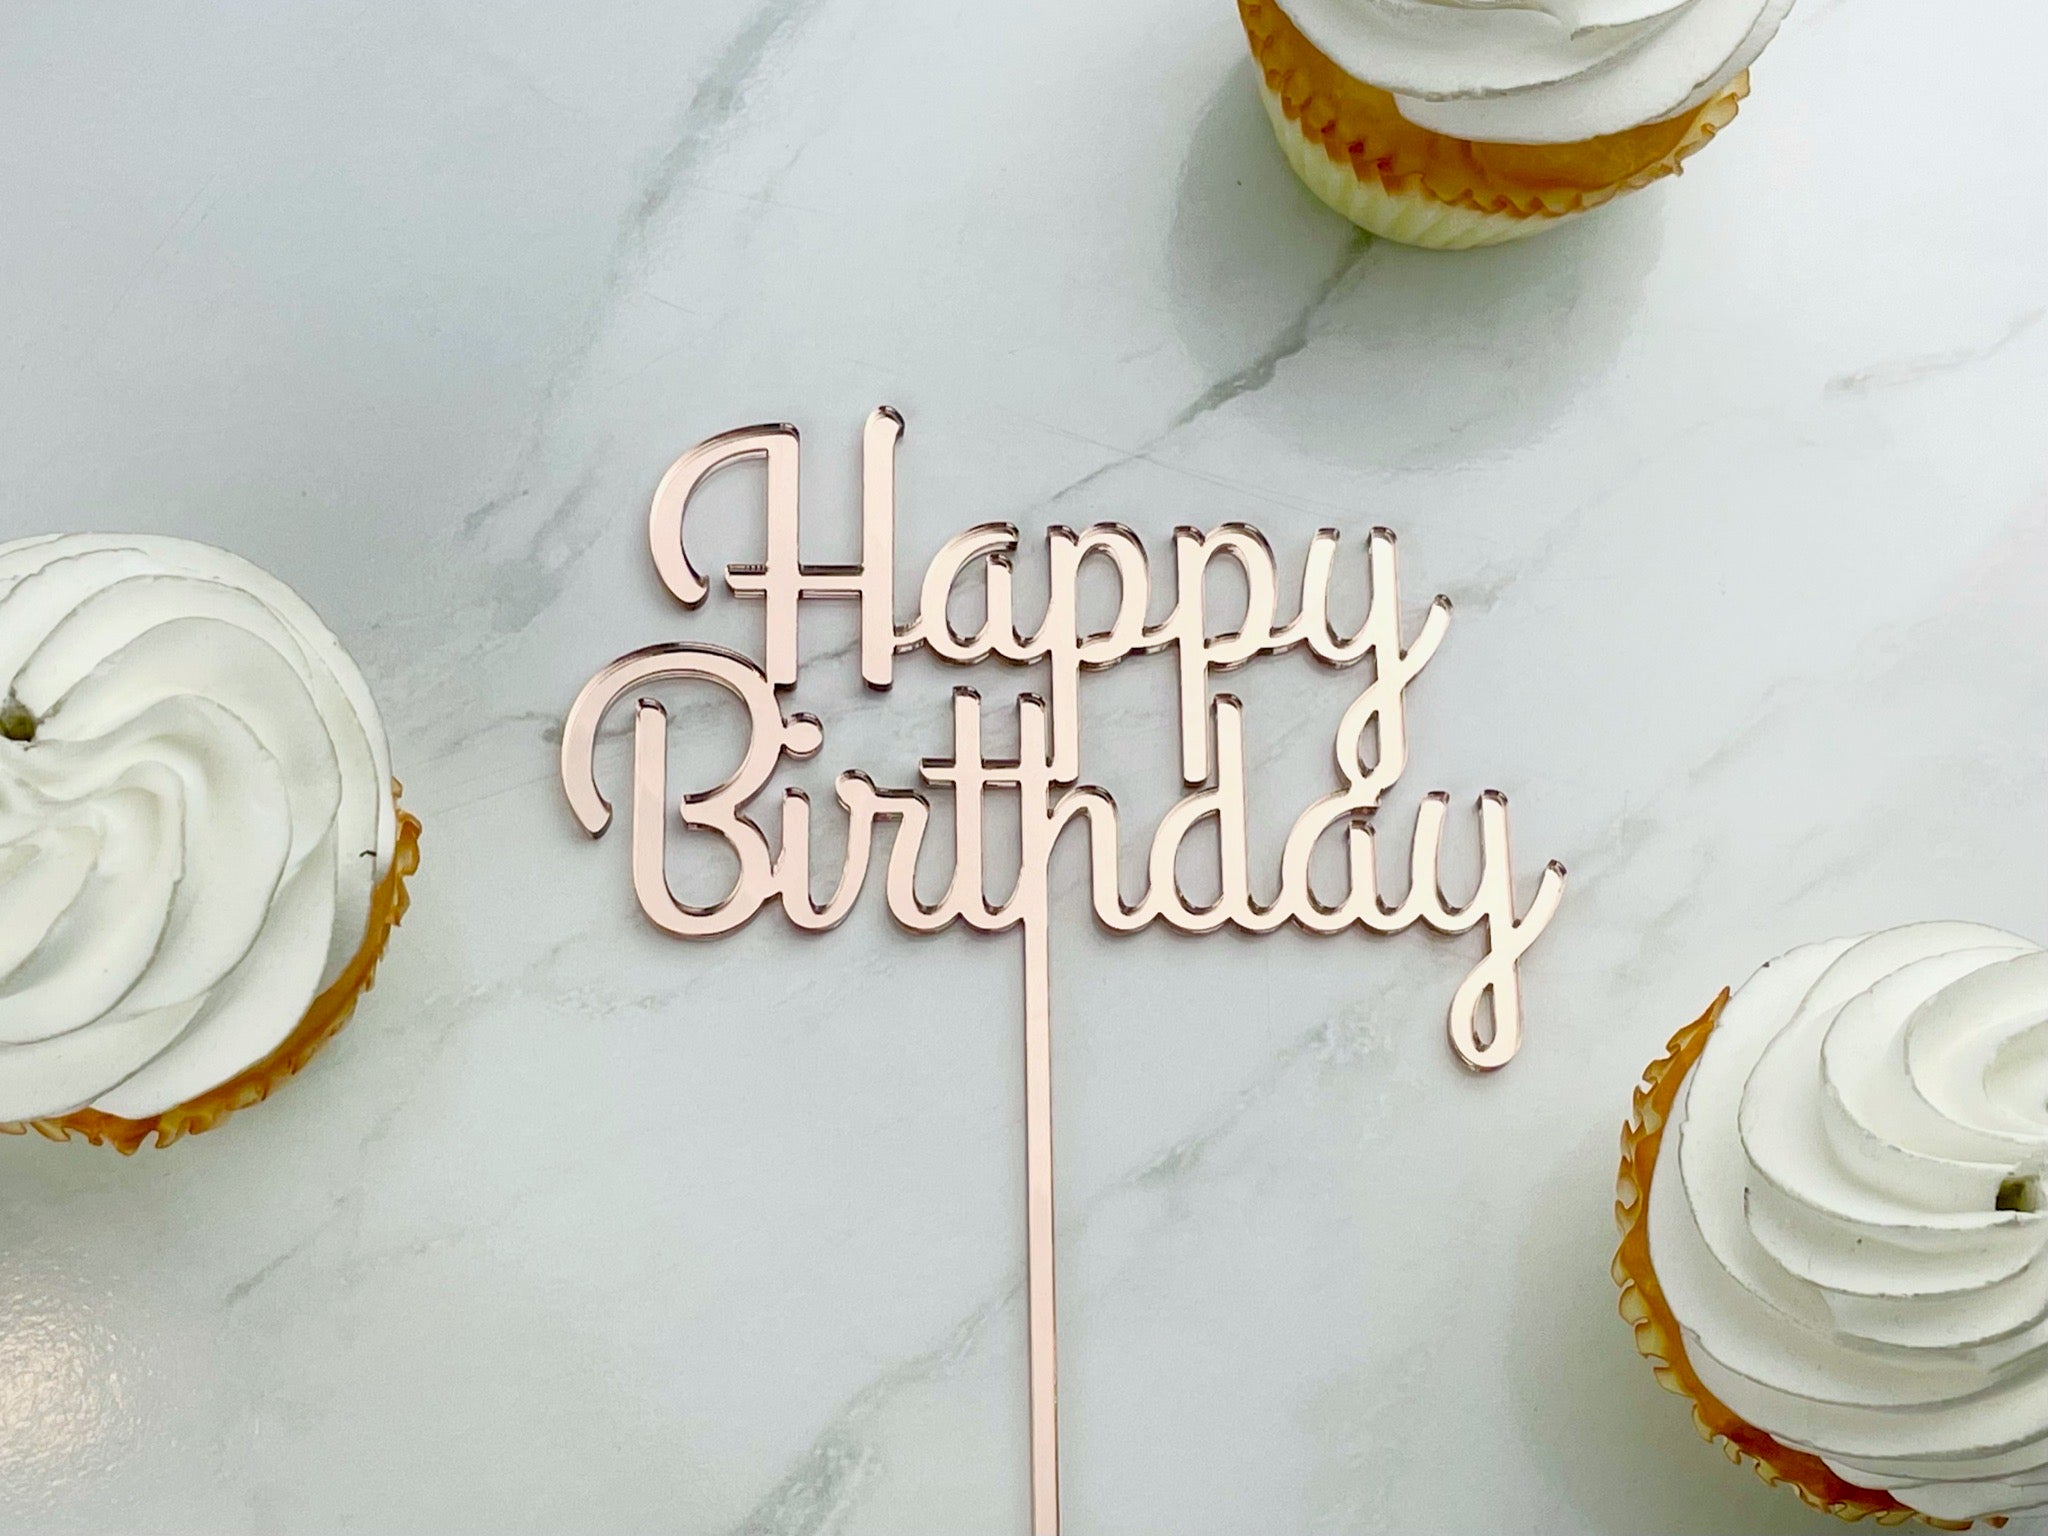 43 Cake topper fonts ideas | topper, birthday cake toppers, cake toppers